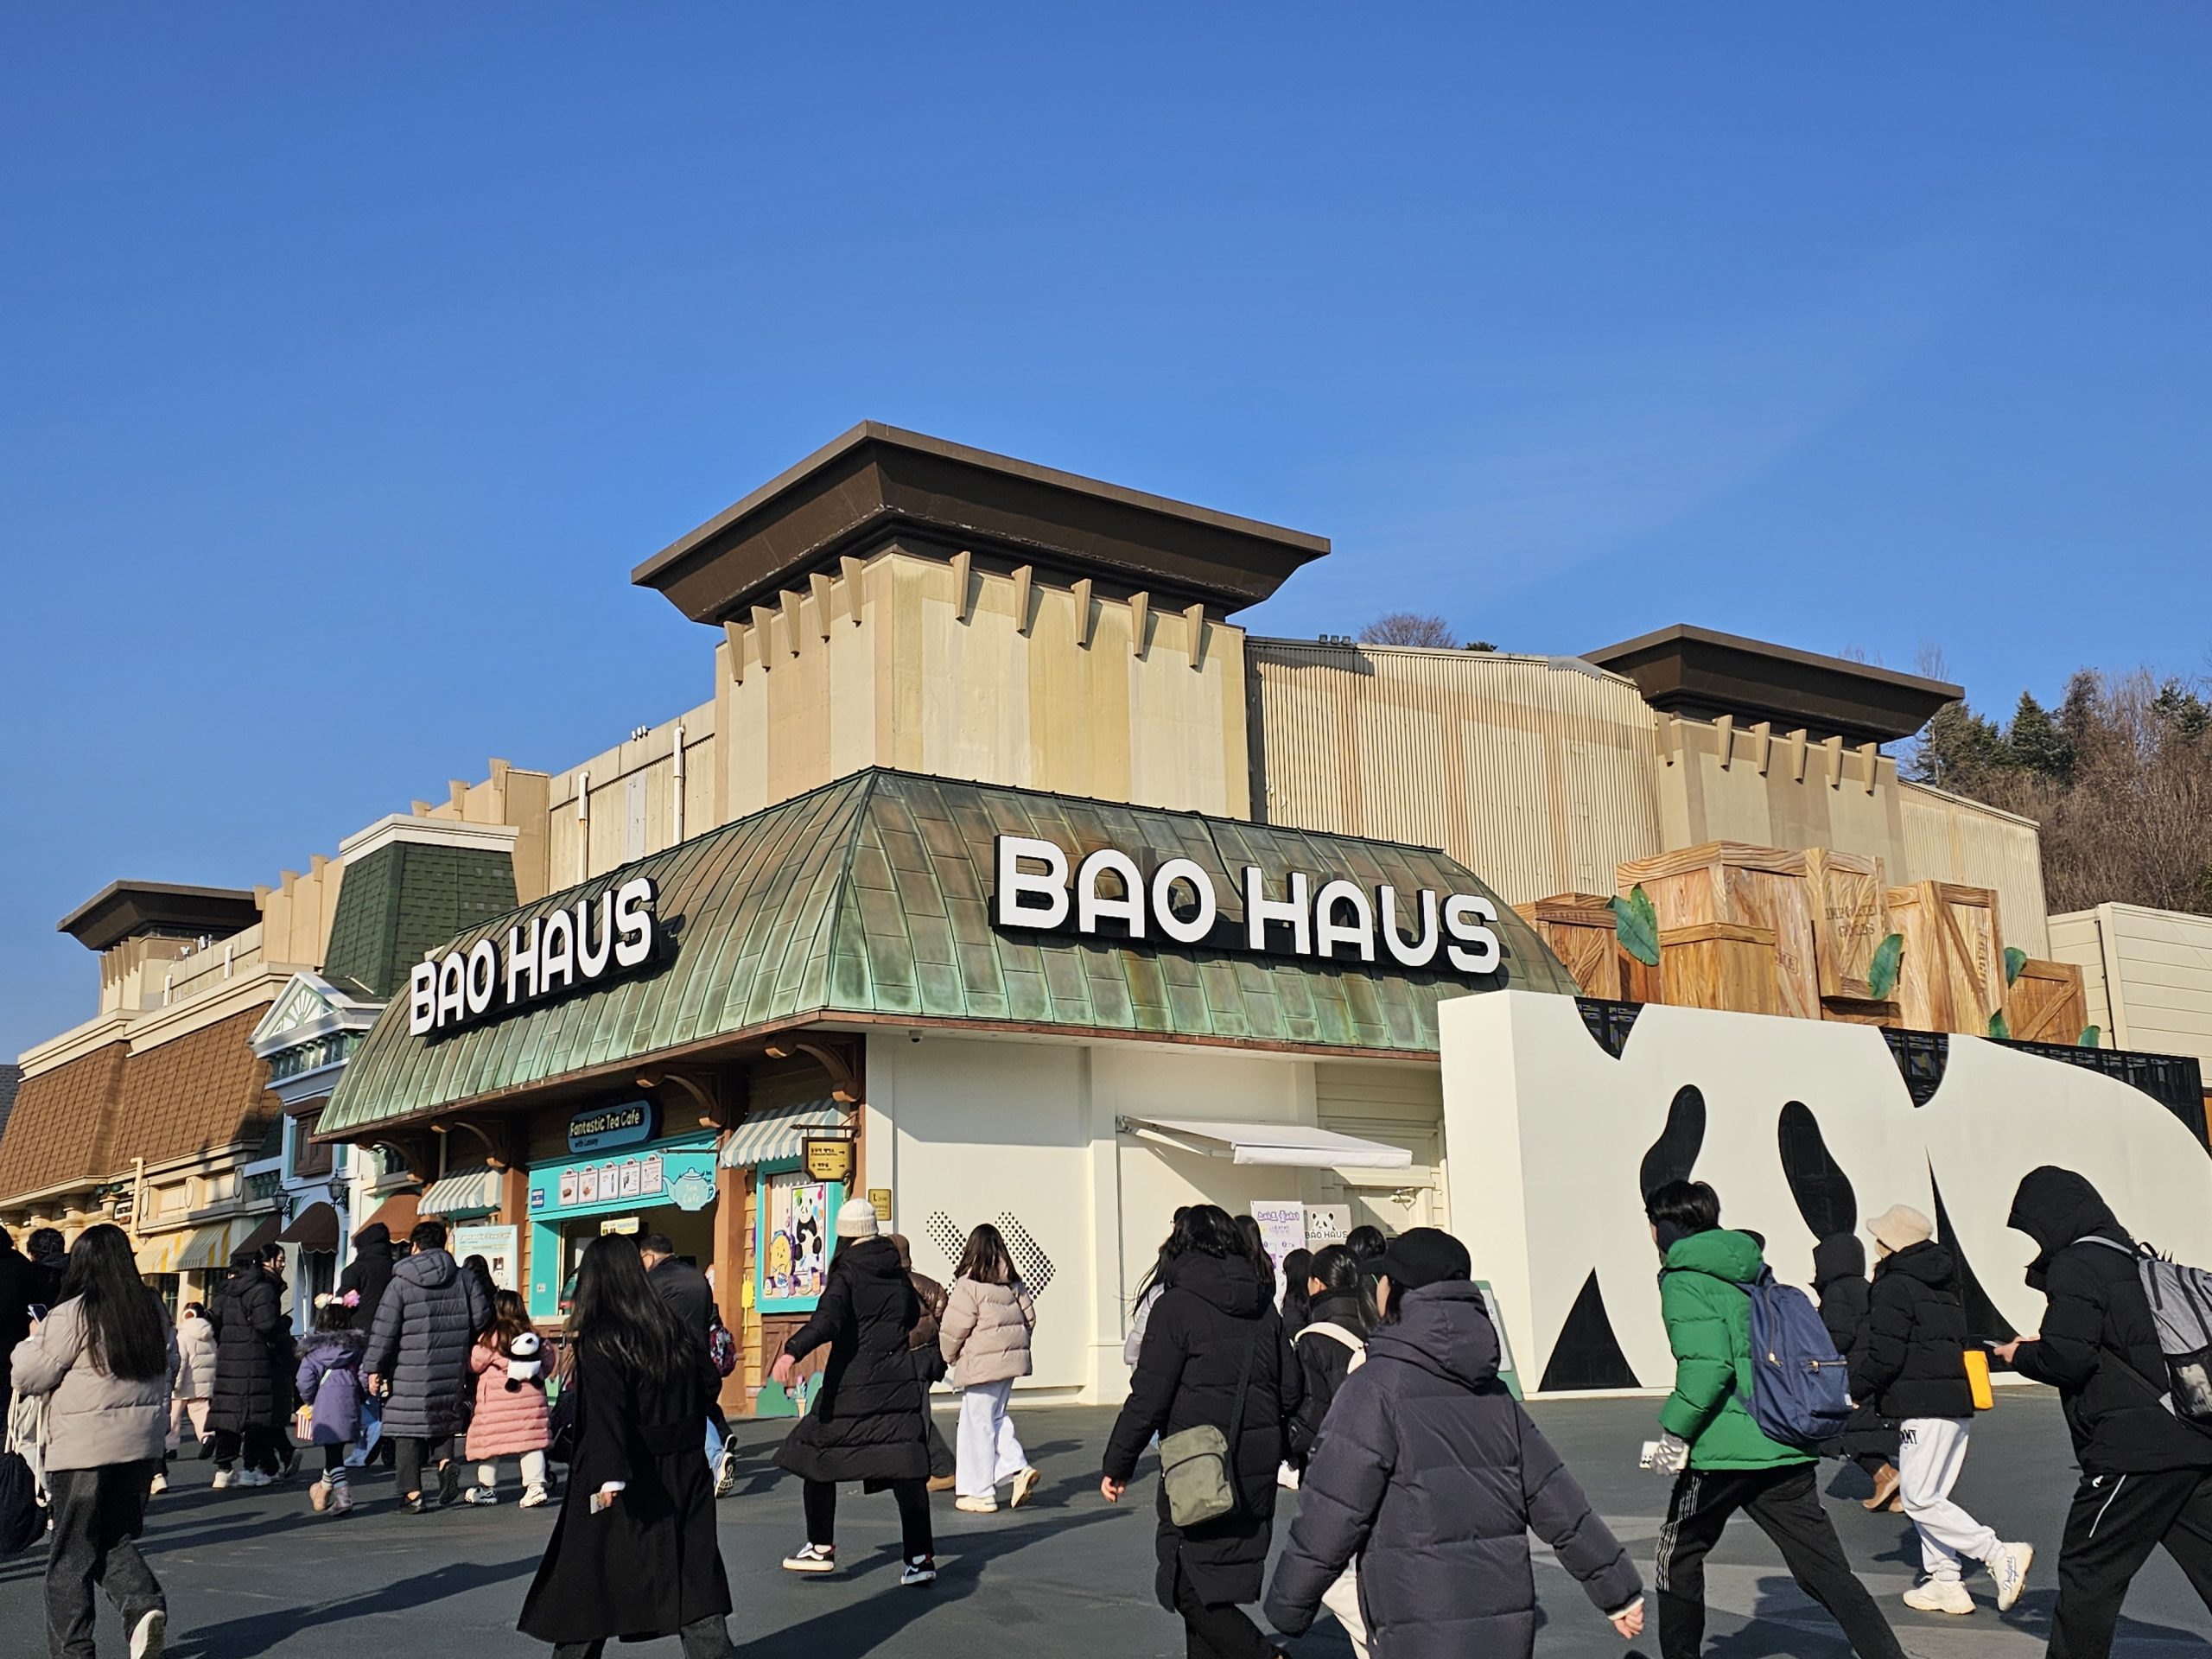 The Bao Haus attraction has drawn a maximum capacity of 1,000 visitors each day.